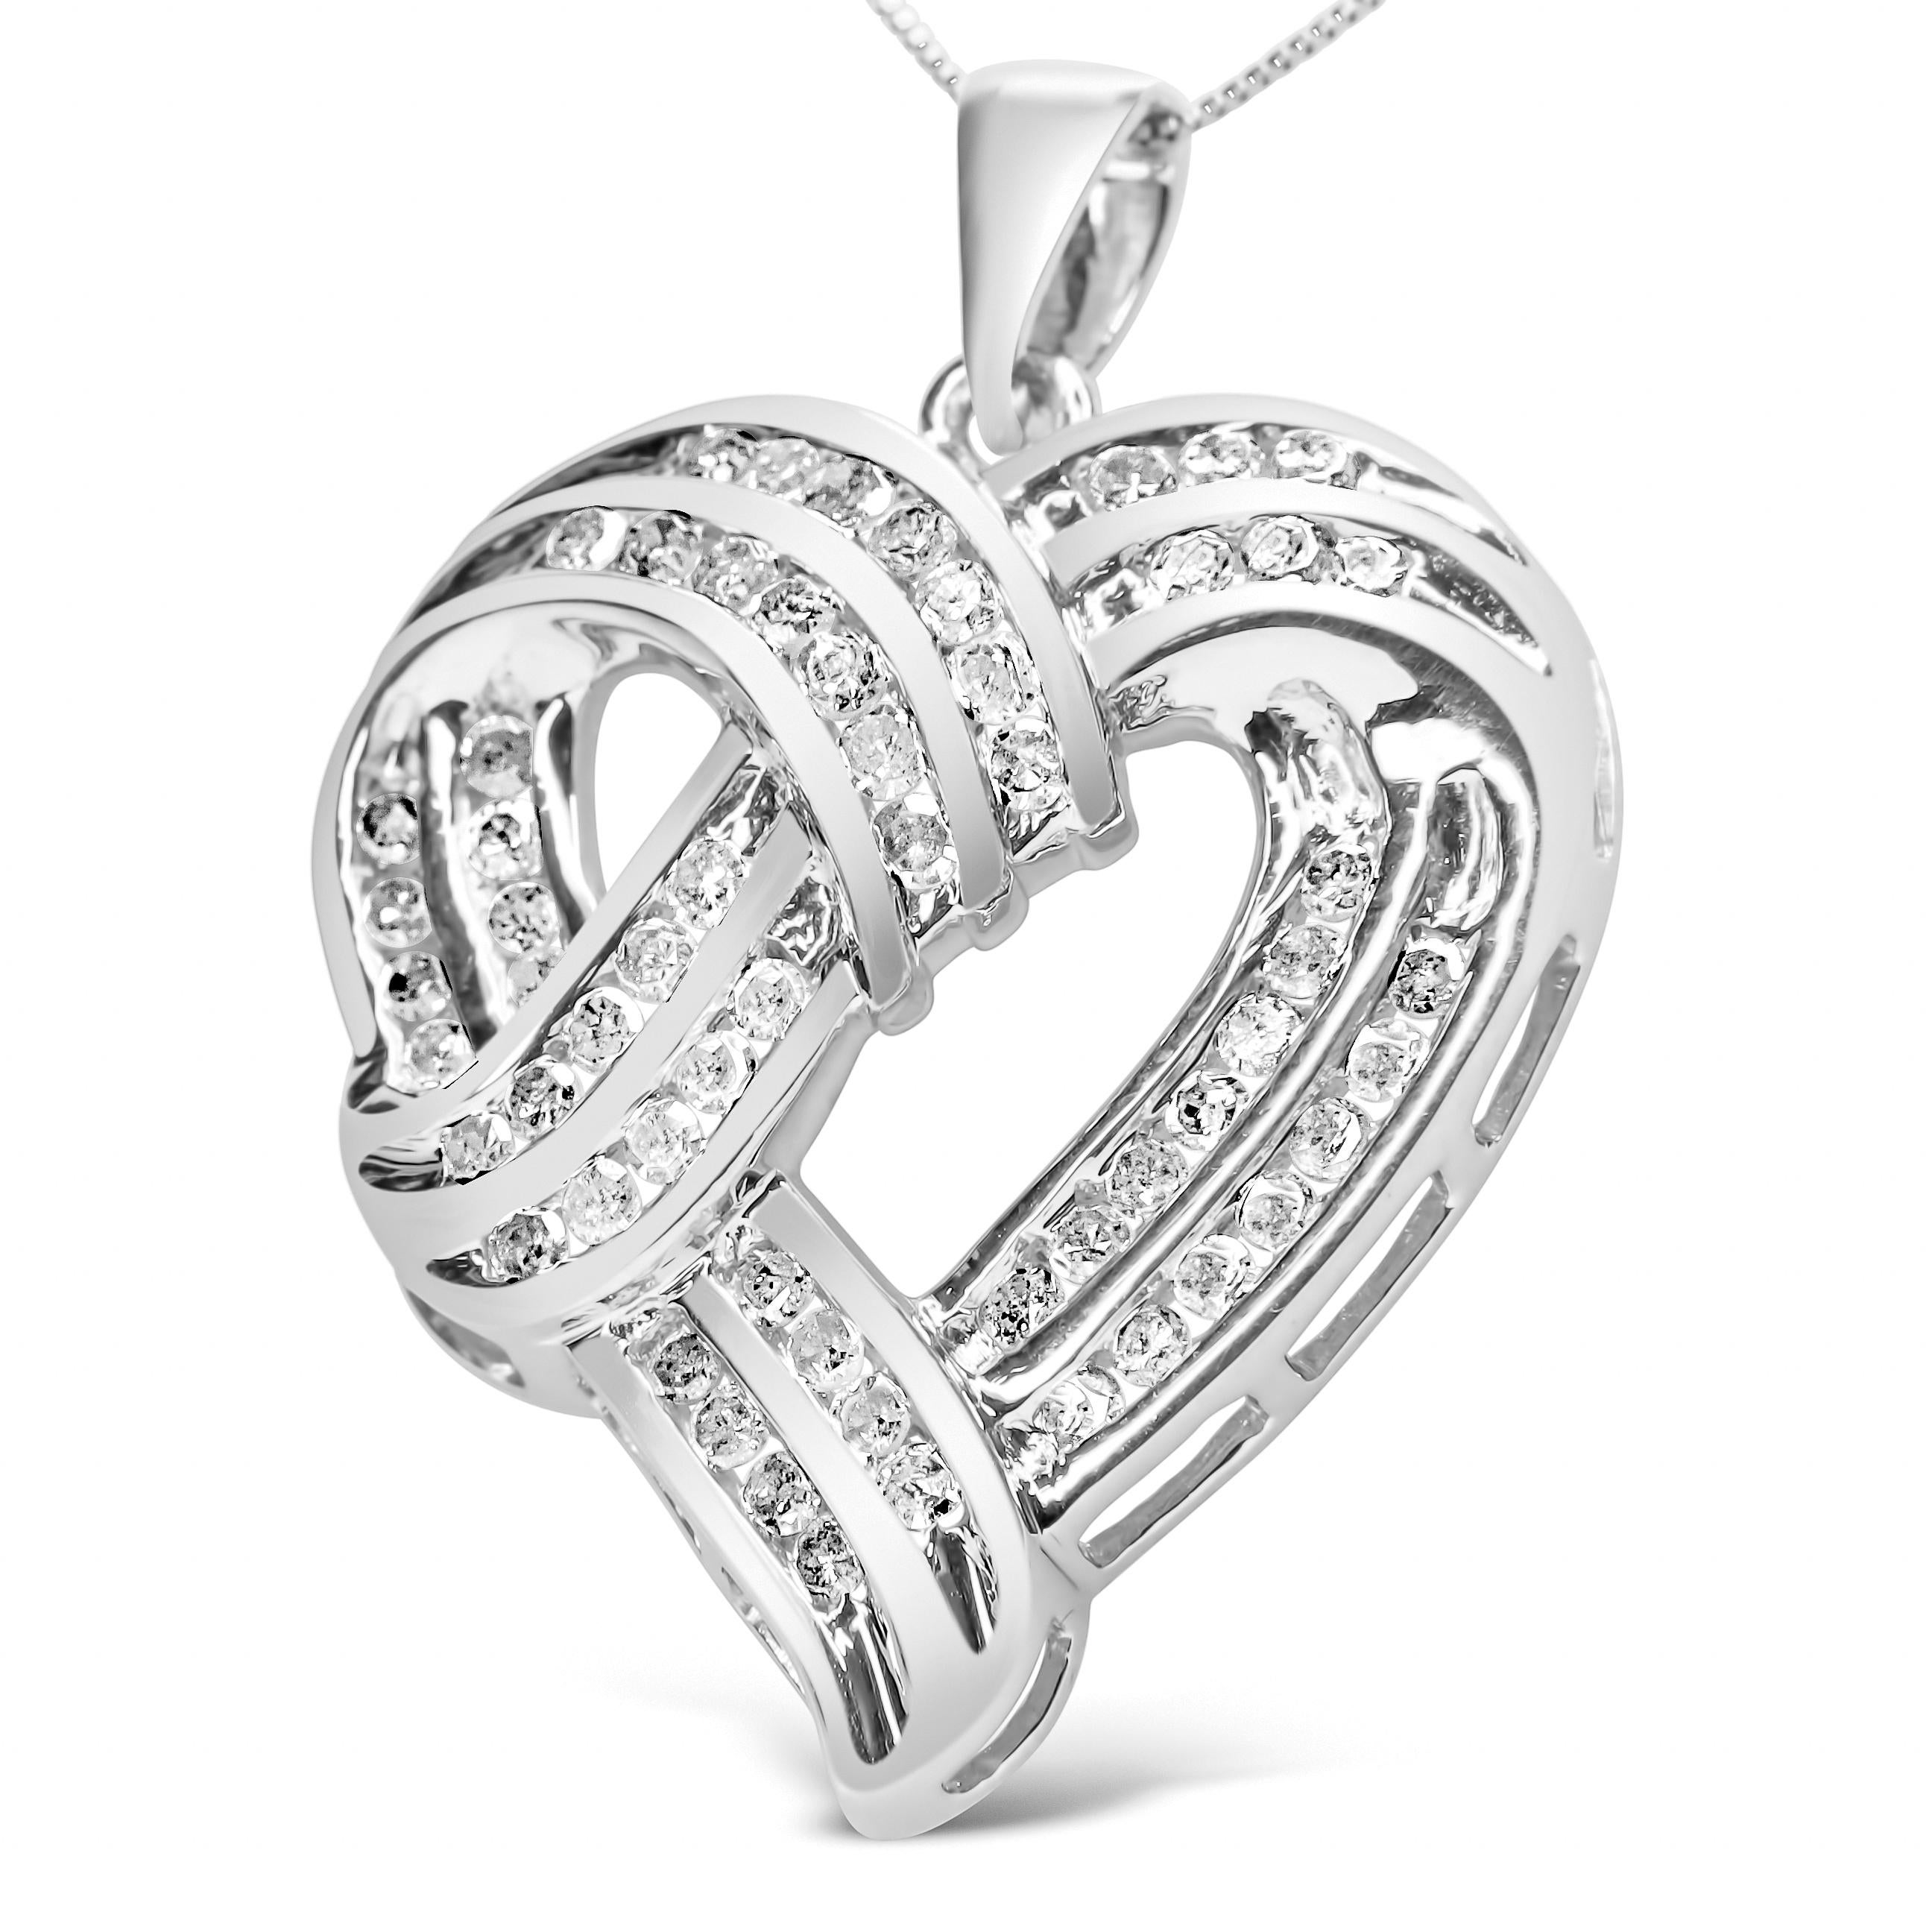 This striking .925 sterling silver pendant necklace features an open heart frame with ribbon-loop detail that is embellished with prong-set round diamonds. The enchanting sparkle is captured from sixty diamonds of a total 1 1/4 cttw and an